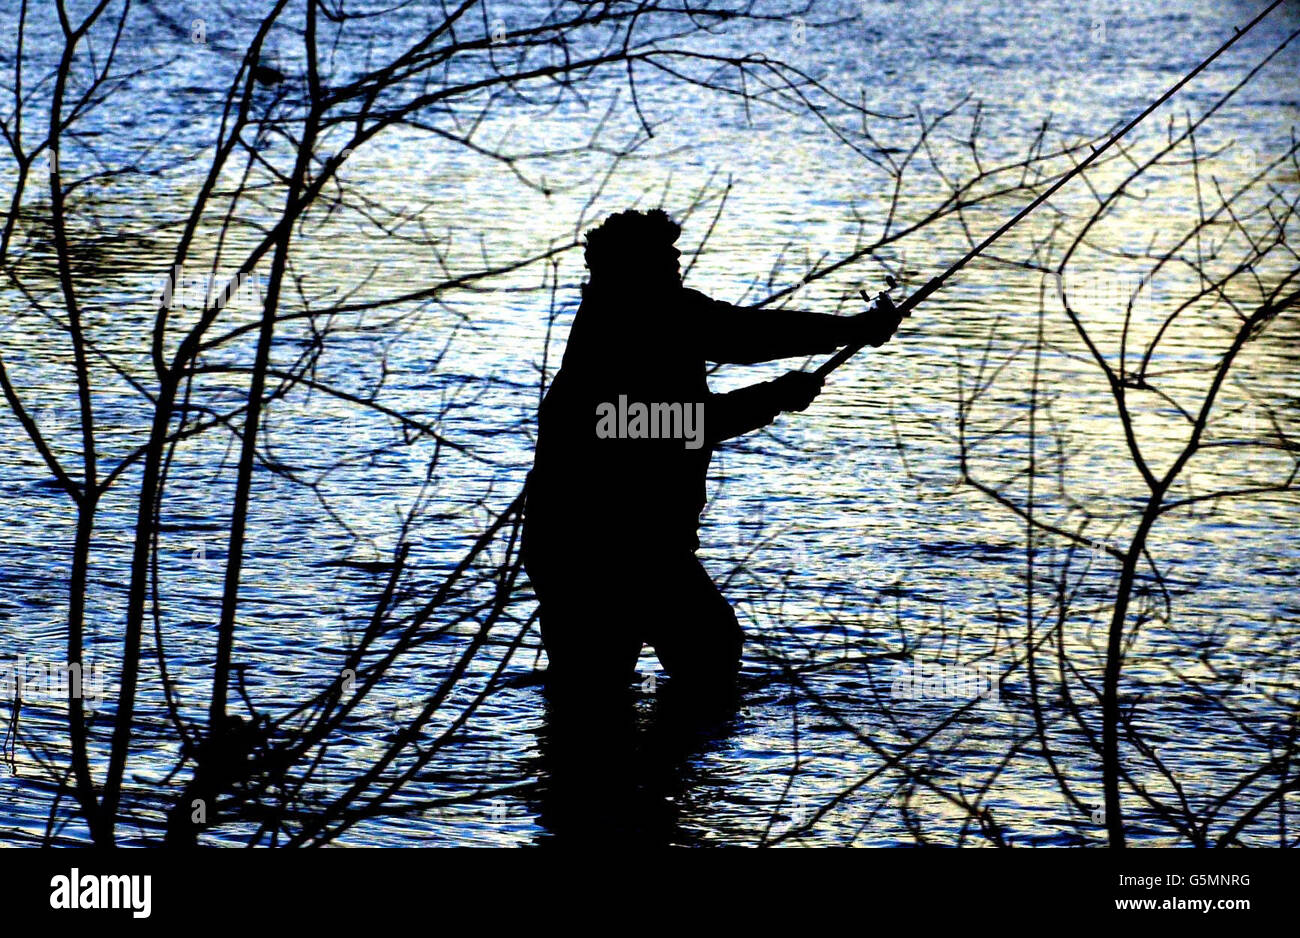 Hundreds of anglers were gathering on the banks of Scotland's biggest river for the launch of the salmon fishing season. The traditional January 15 start of the nine-month season on the Tay, in Perth and Kinross, is one of the biggest dates in the fishing calendar. * Although some rivers have already opened their season, the Tay is the first of the really big rivers to do so. Stock Photo